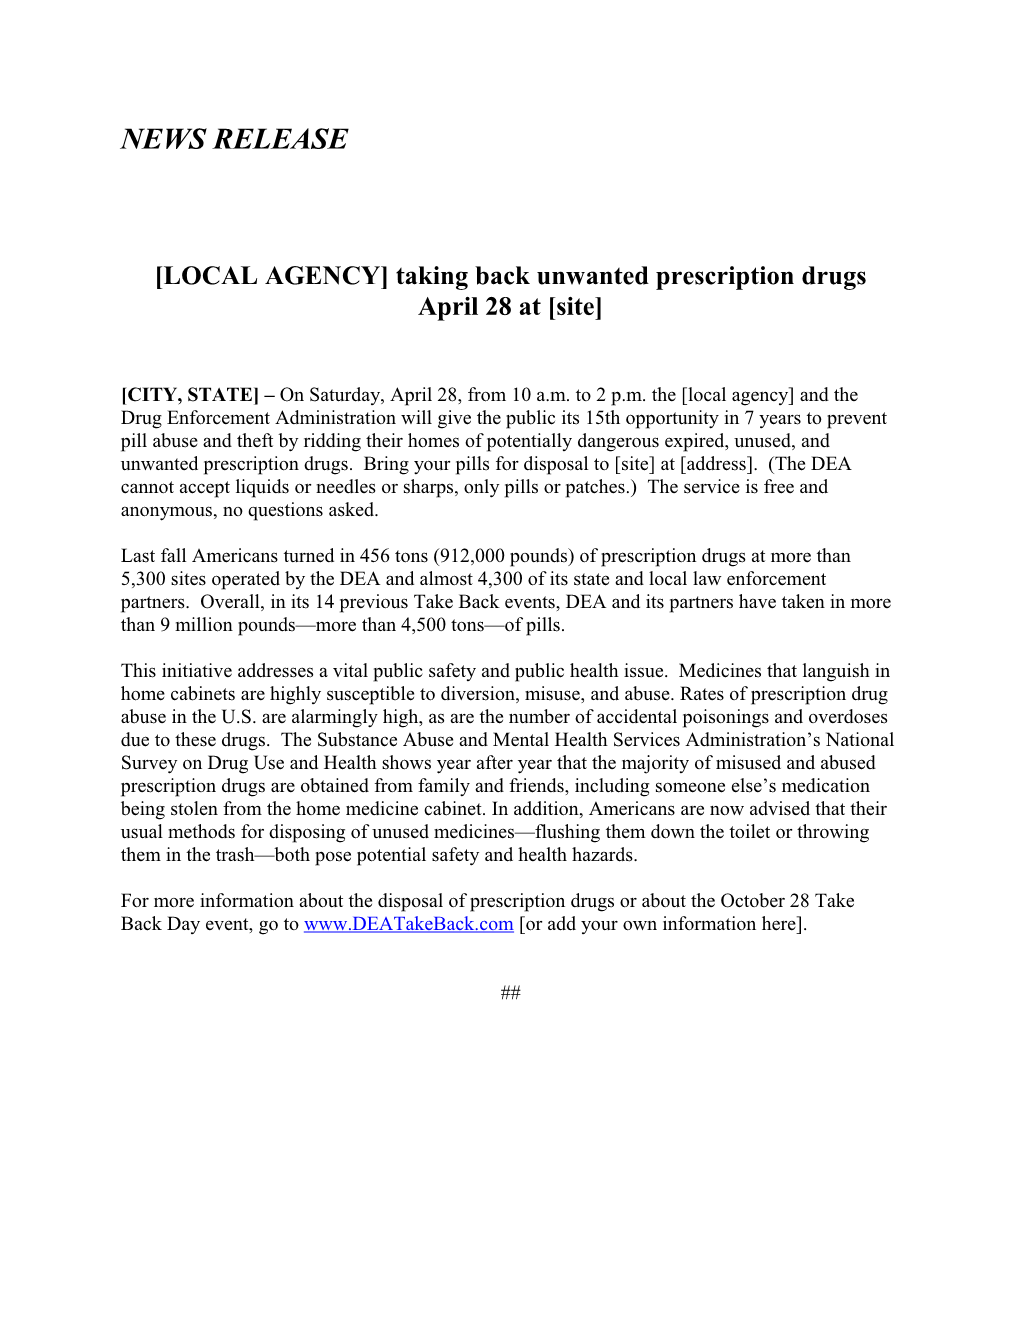 LOCAL AGENCY Taking Back Unwanted Prescription Drugs April 28 at Site